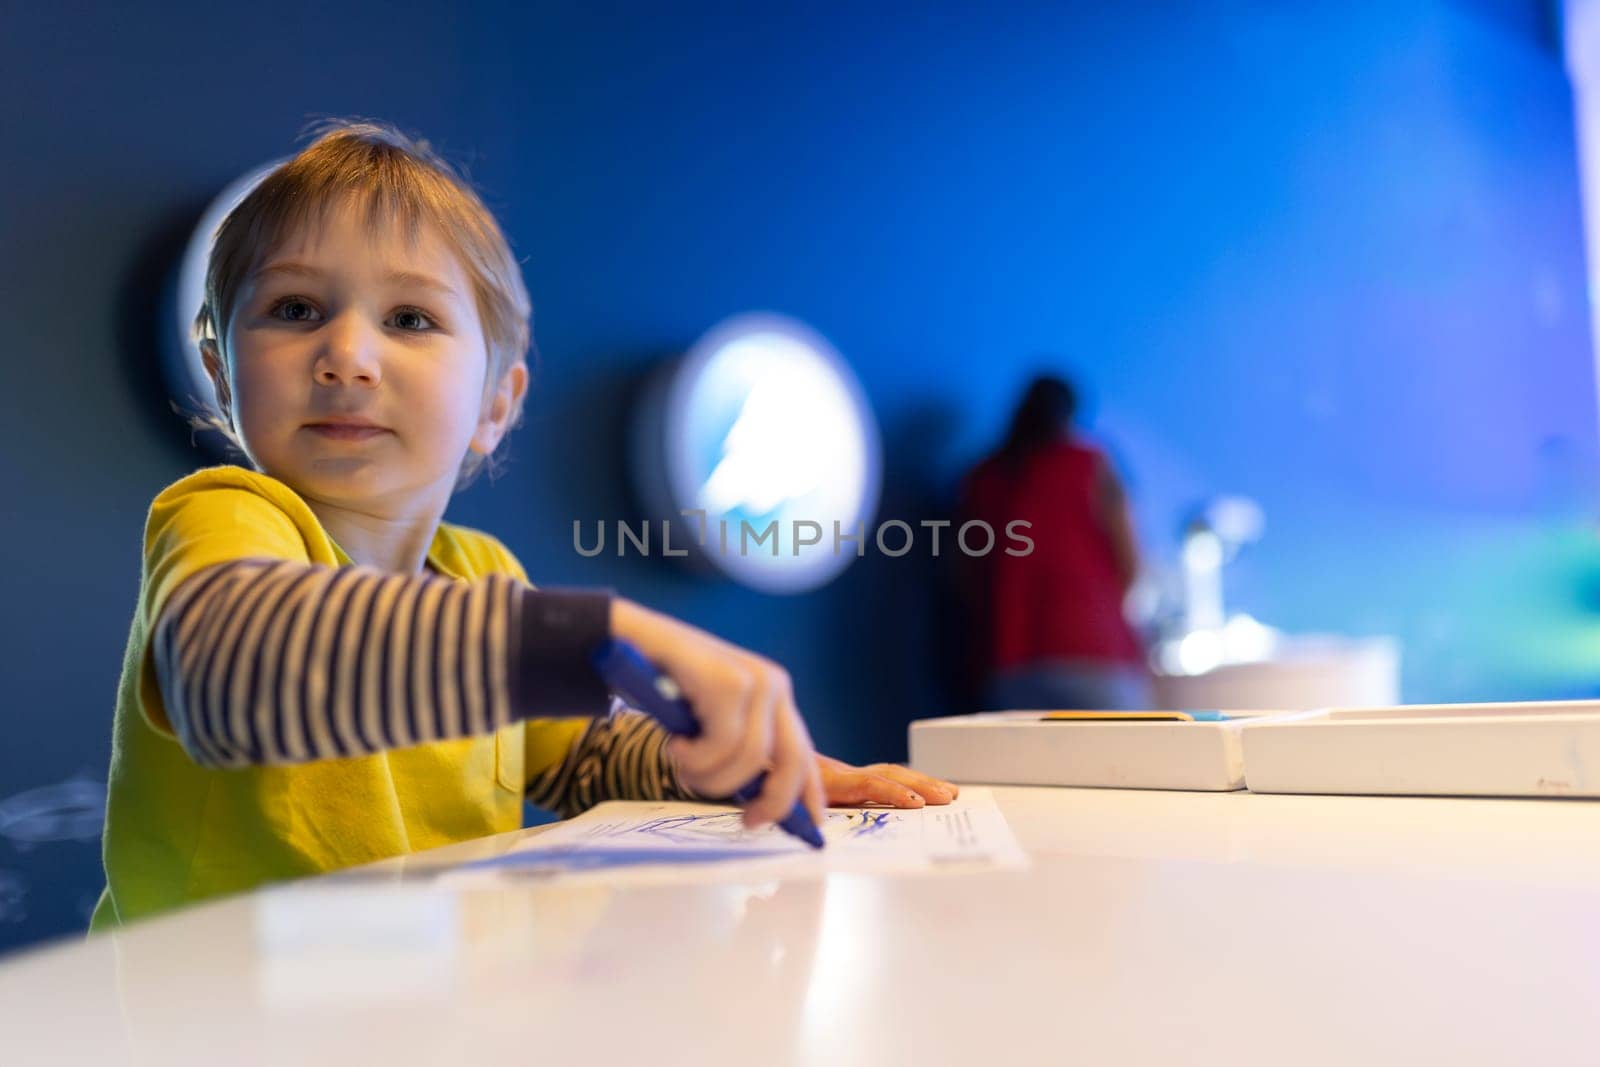 A young boy is sitting at a table with a blue marker in his hand by Studia72